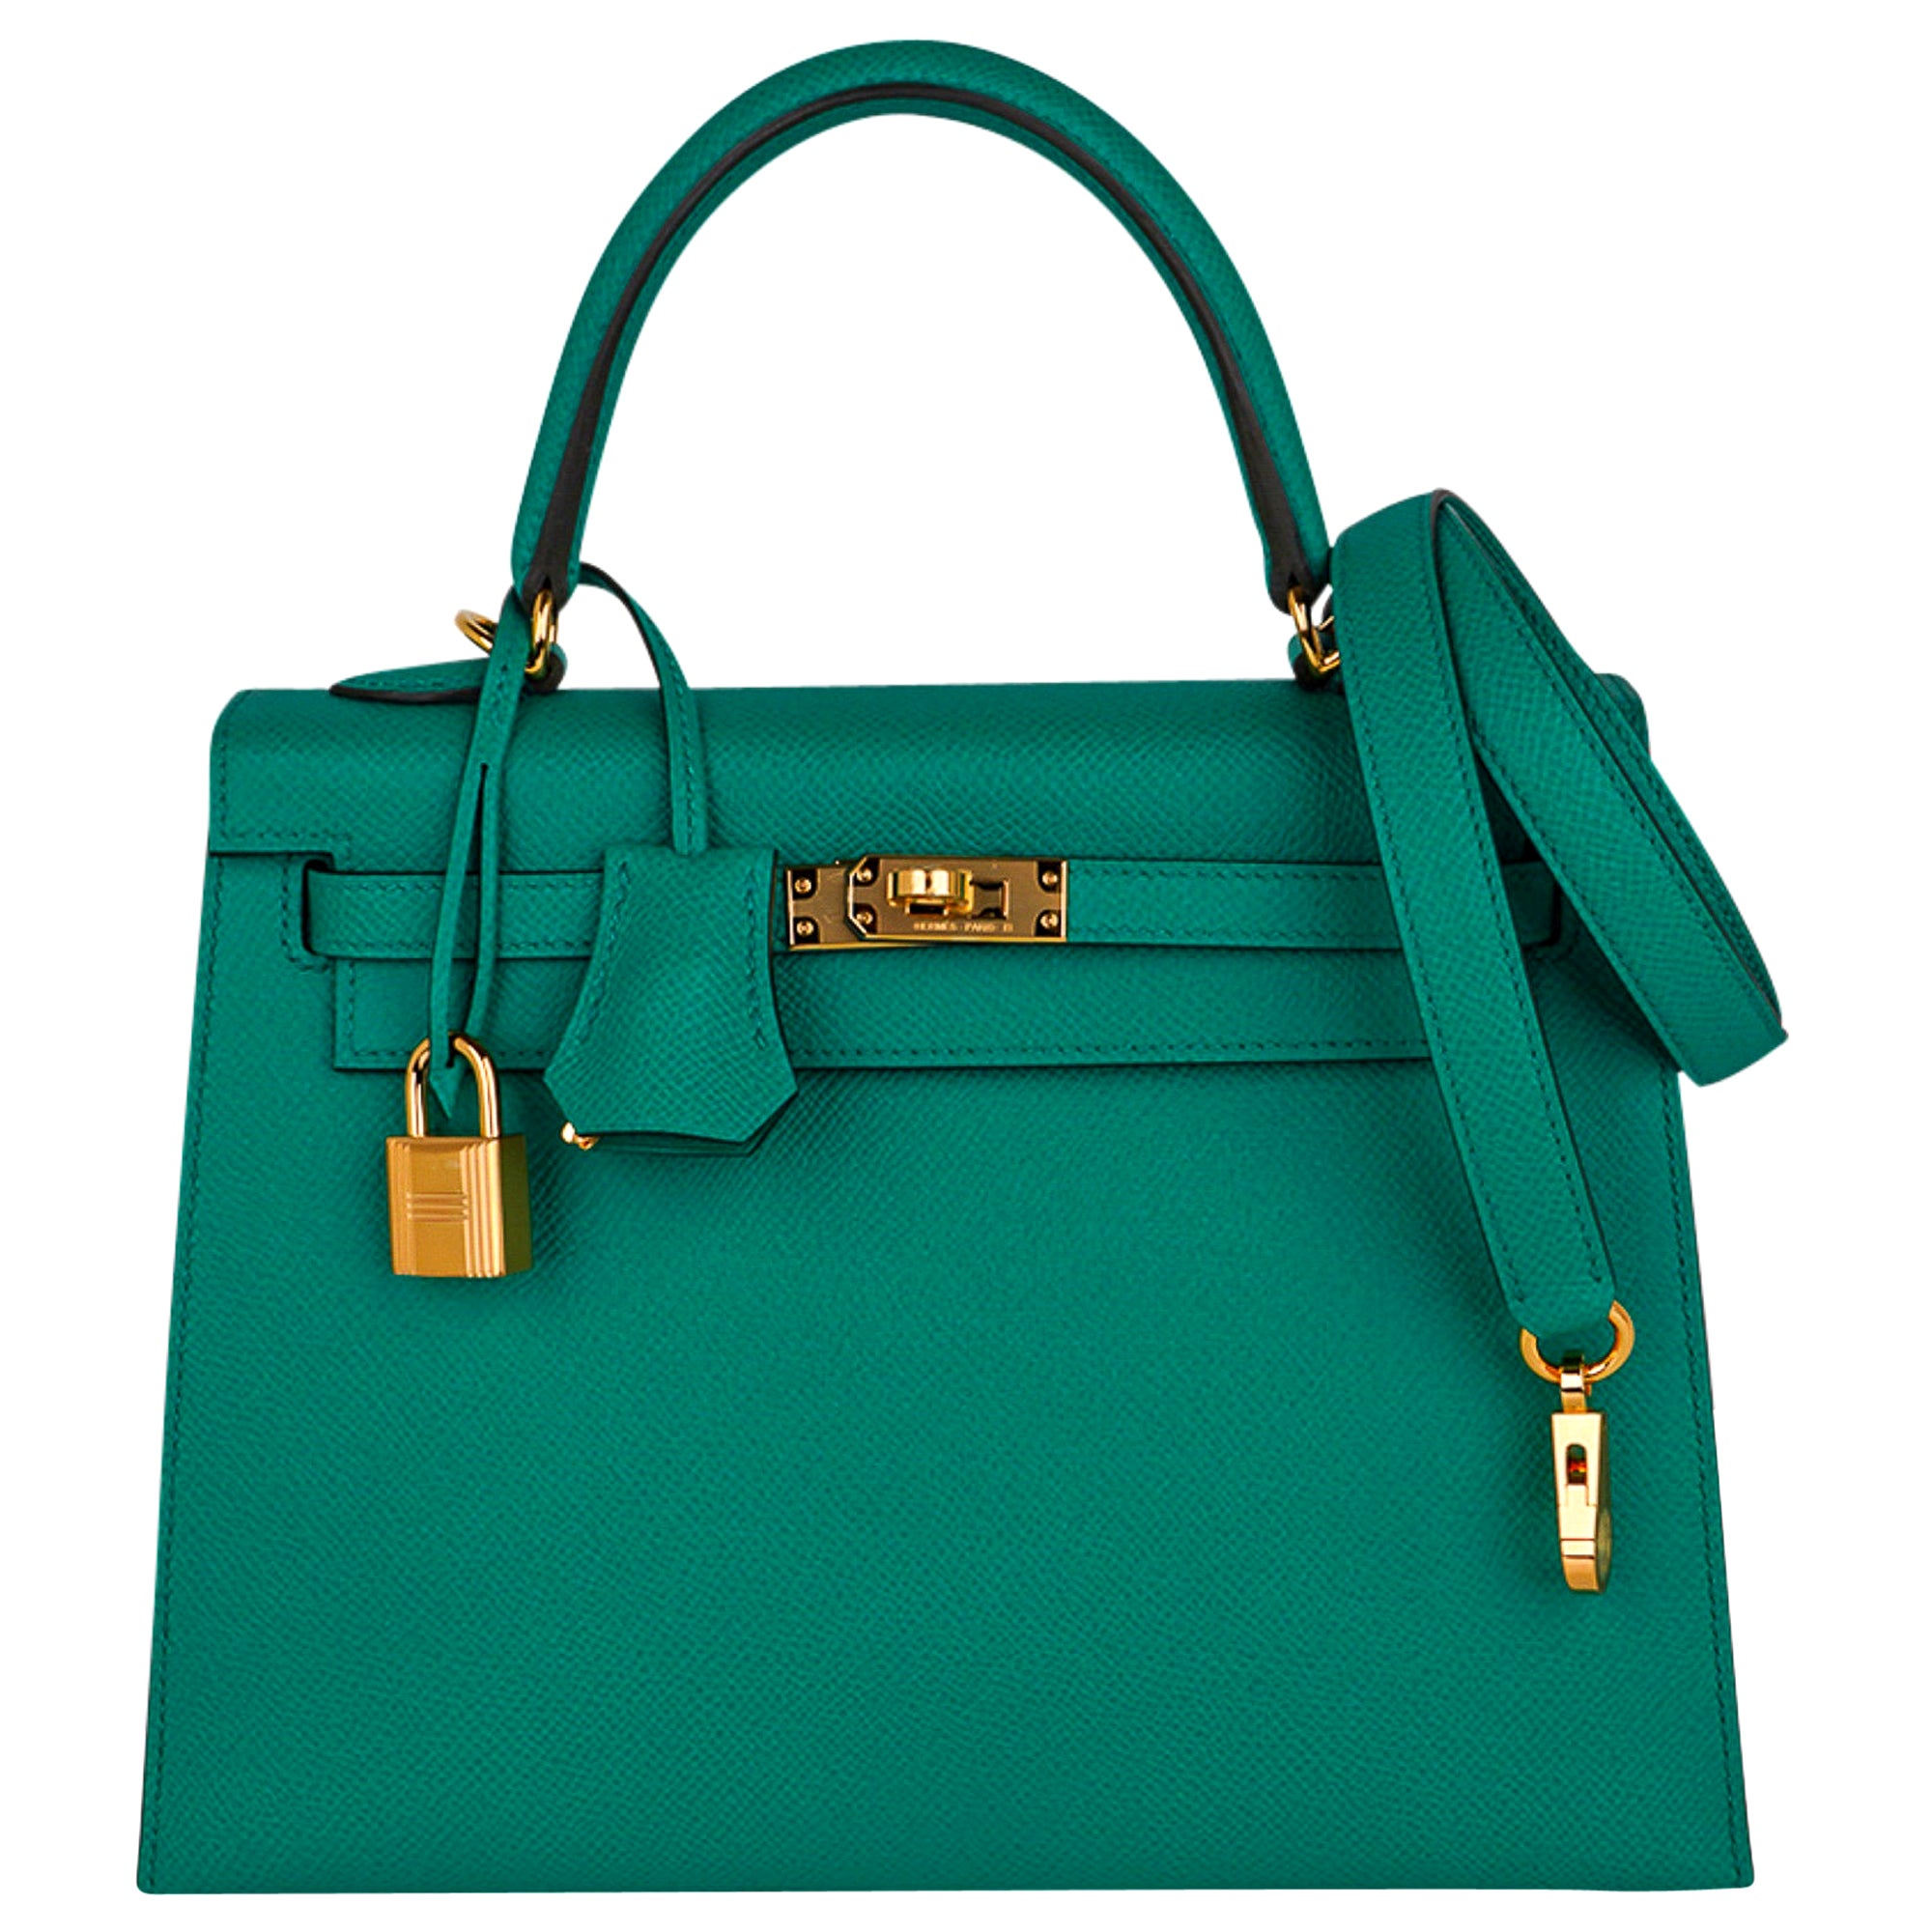 Are Hermès Kelly bags a good investment?